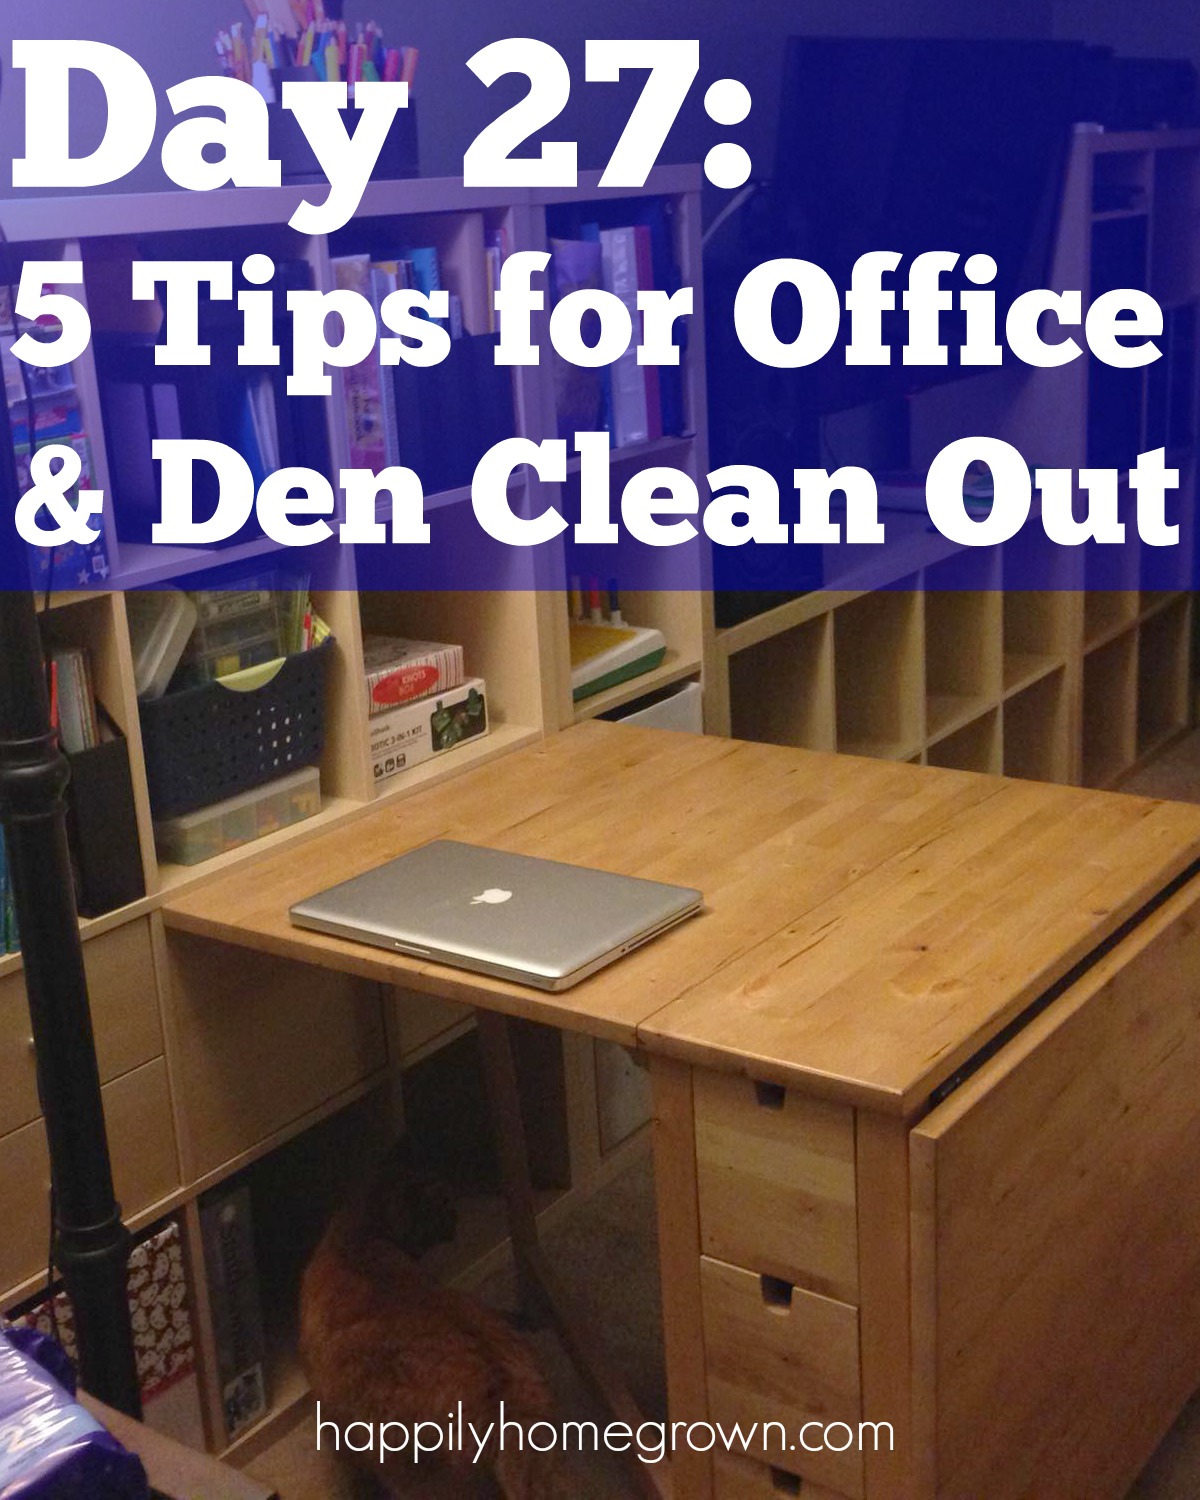 Now that we took care of the paper clutter, its time to look at your office space as a whole. Here are 5 tips for your office & den clean out.